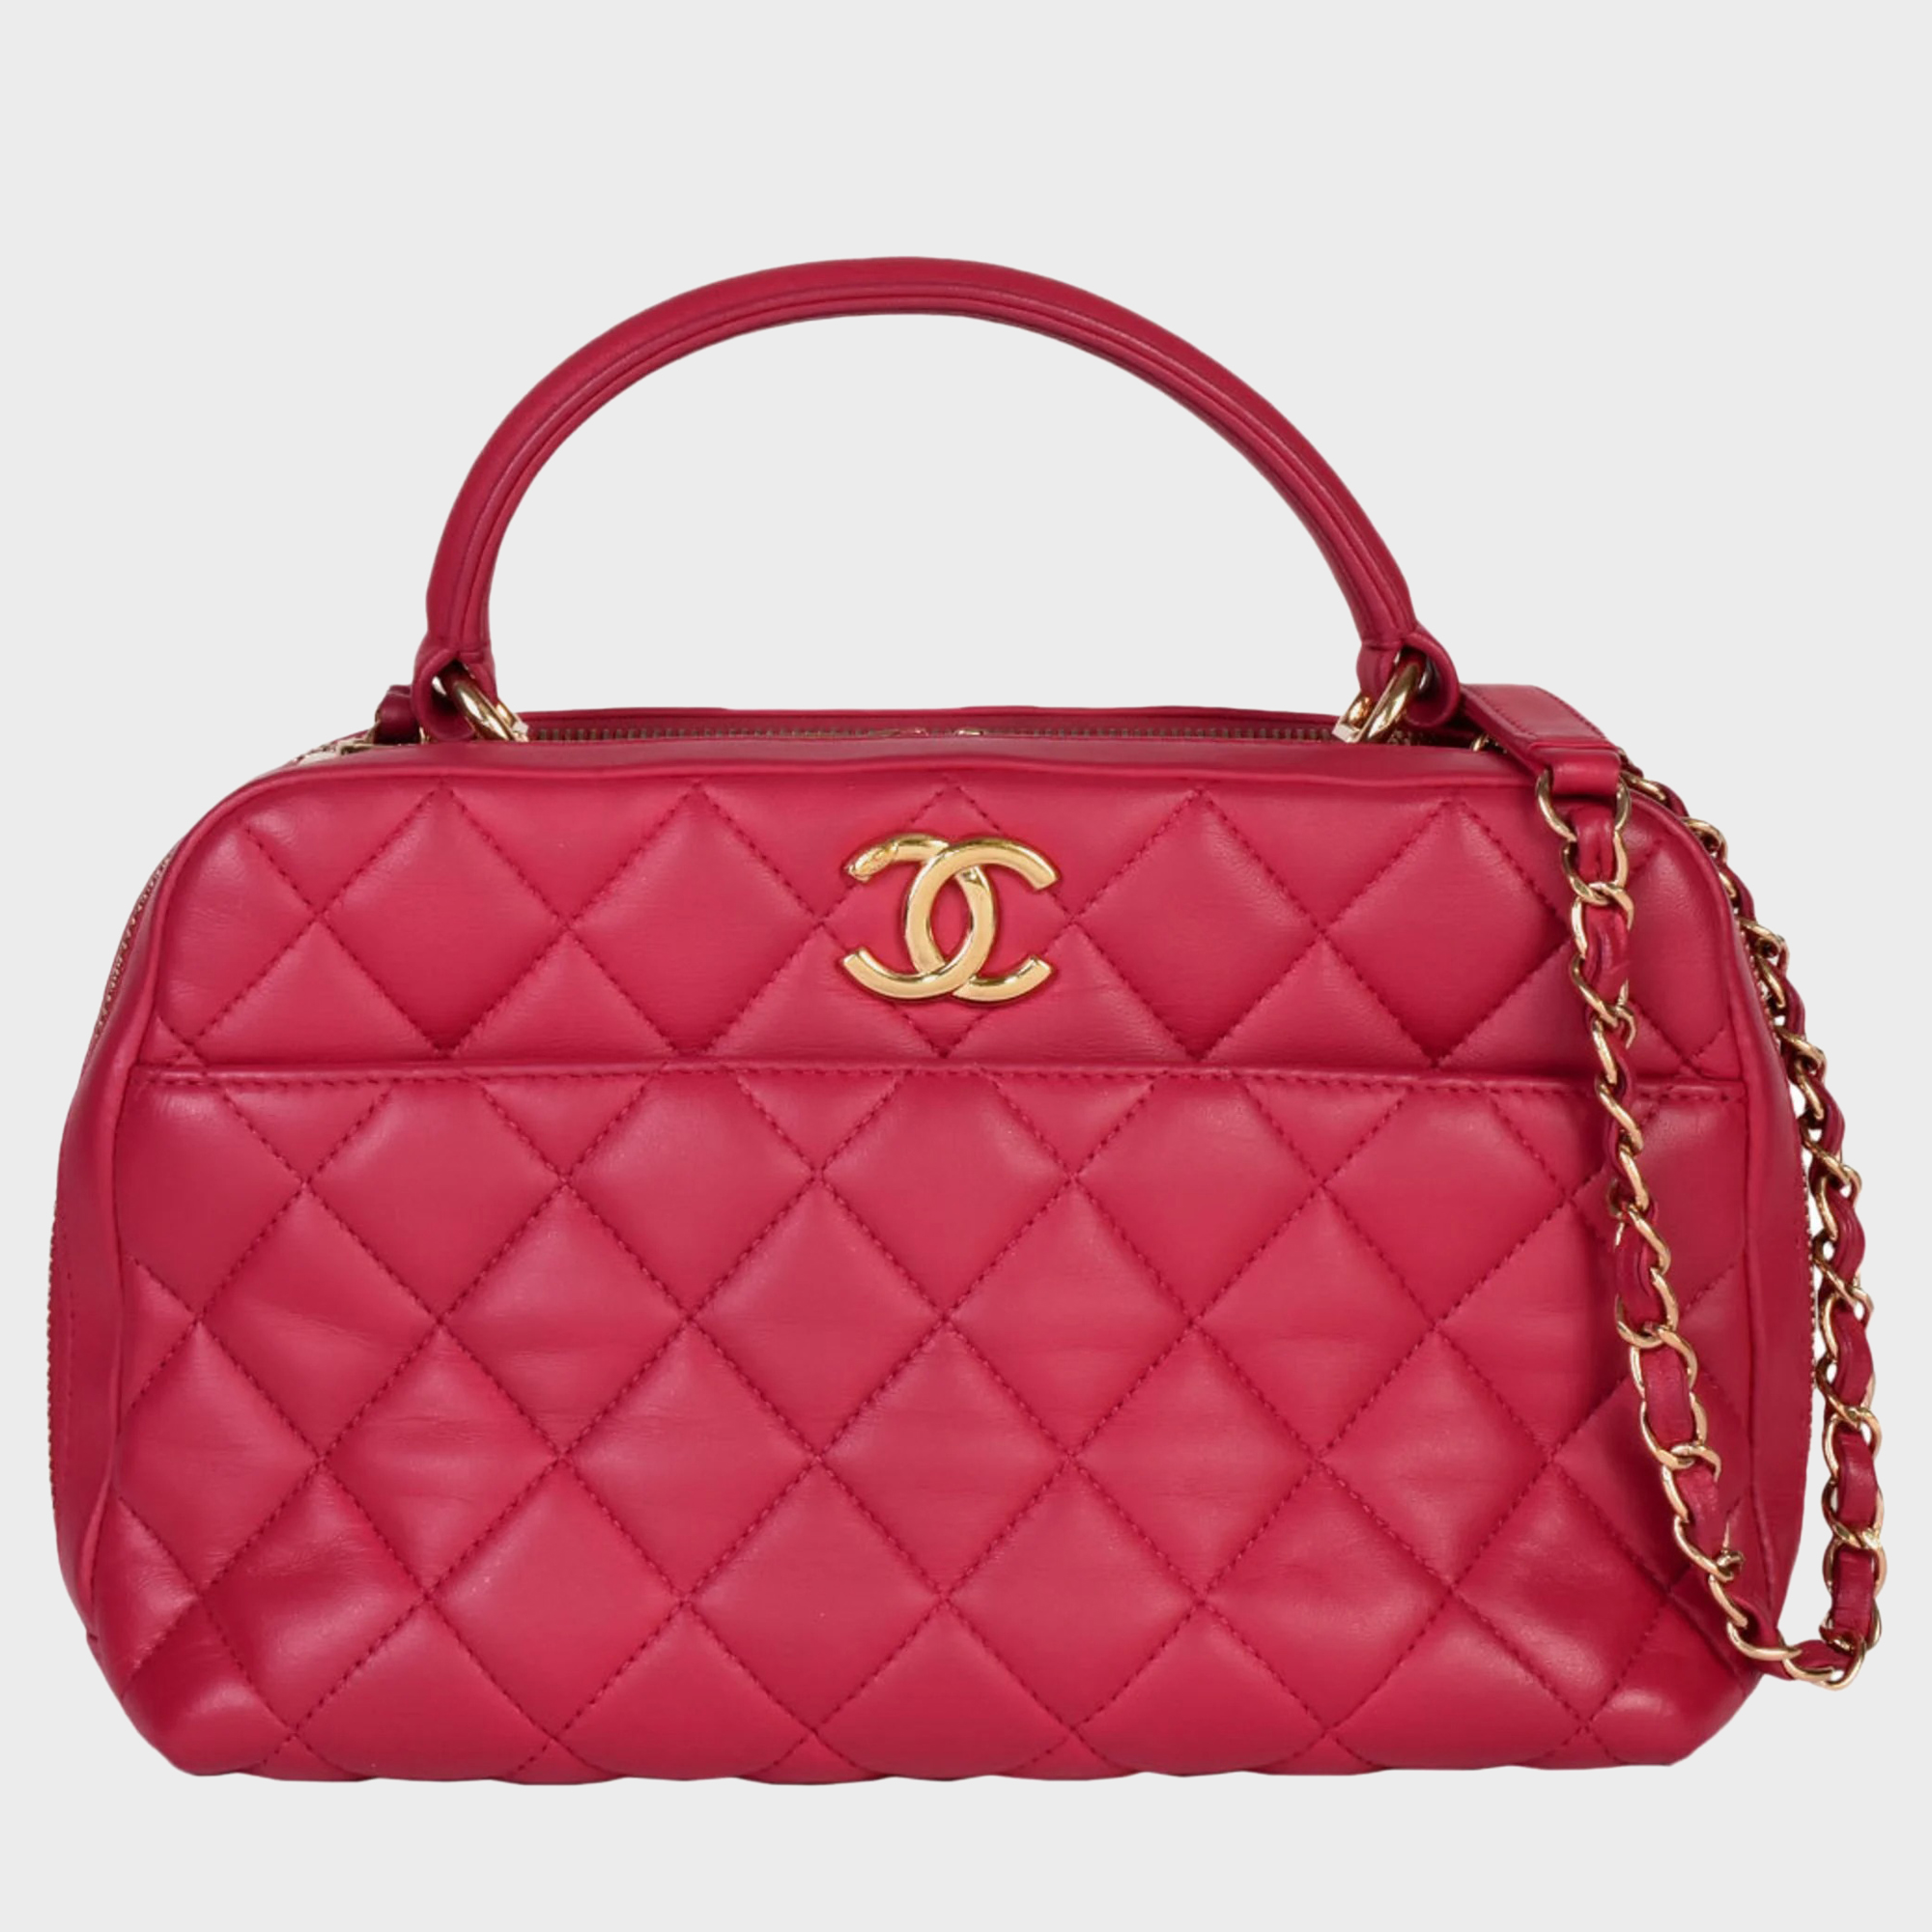 Chanel pink quilted lambskin medium trendy cc bowling bag